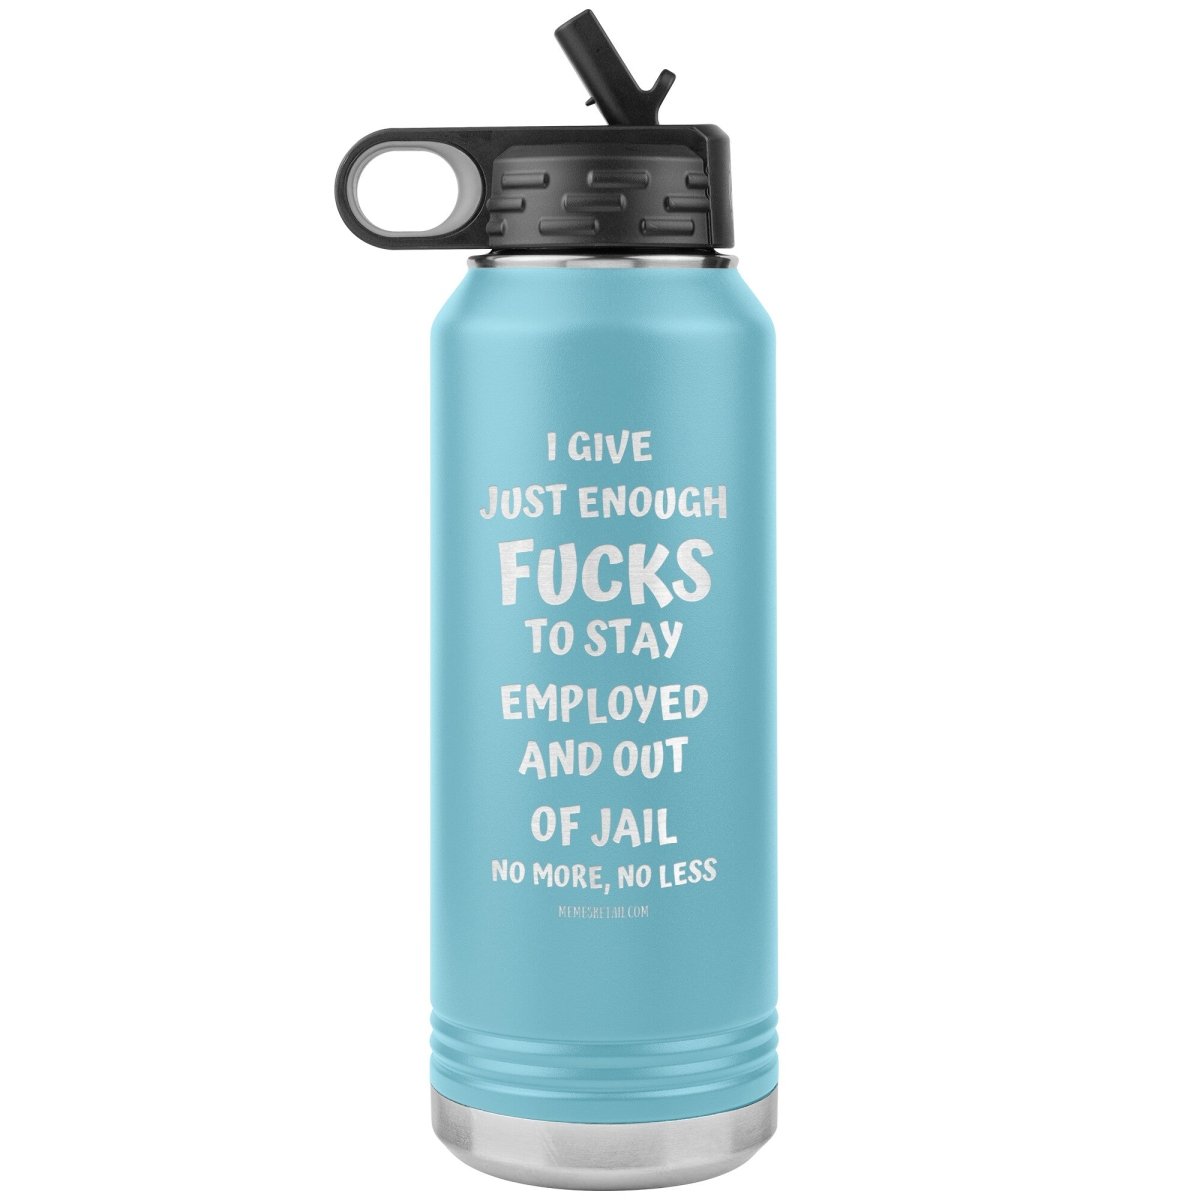 I Give Just Enough Fucks To Stay Employed And Out Of Jail, No More, No Less 32 Oz Water Bottle Tumbler, Light Blue - MemesRetail.com